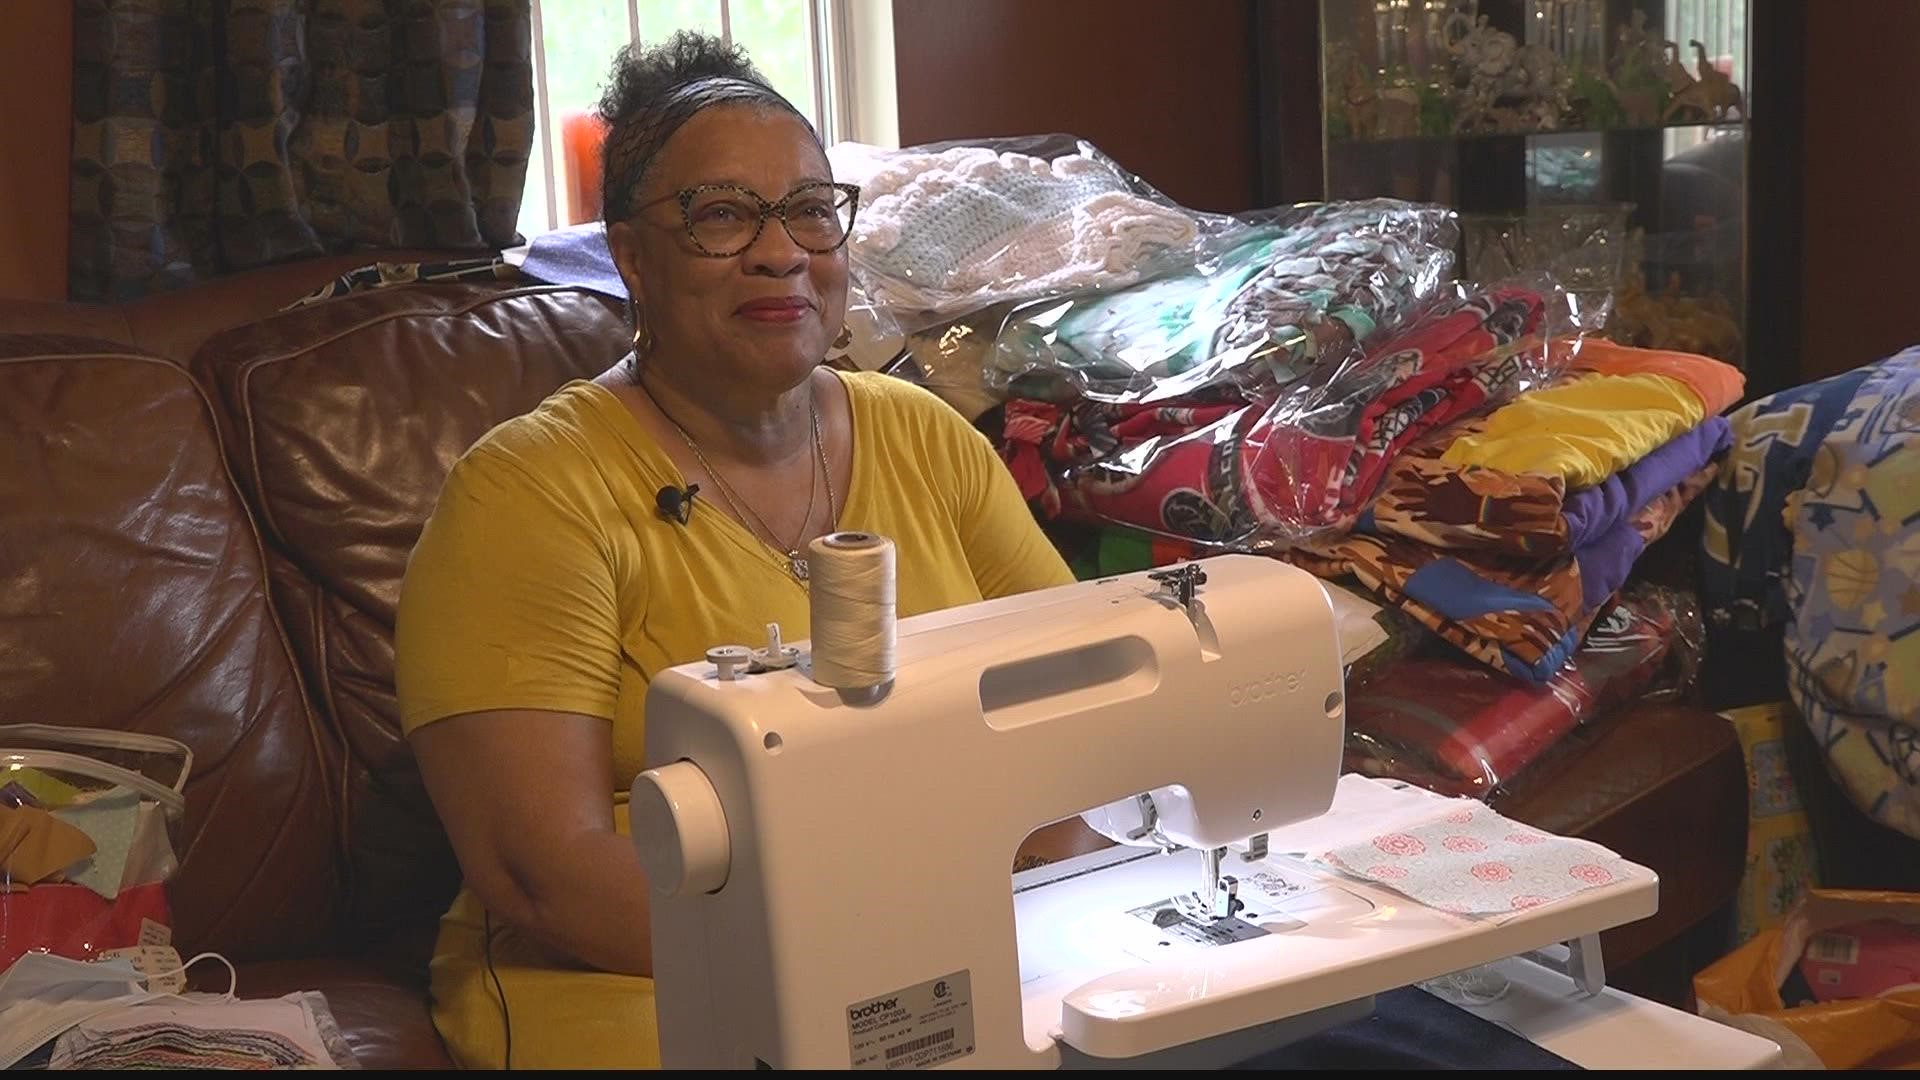 This is what brought her to buy a sewing machine for her living room in East Point and to sign up for a zoom class to learn during the pandemic.